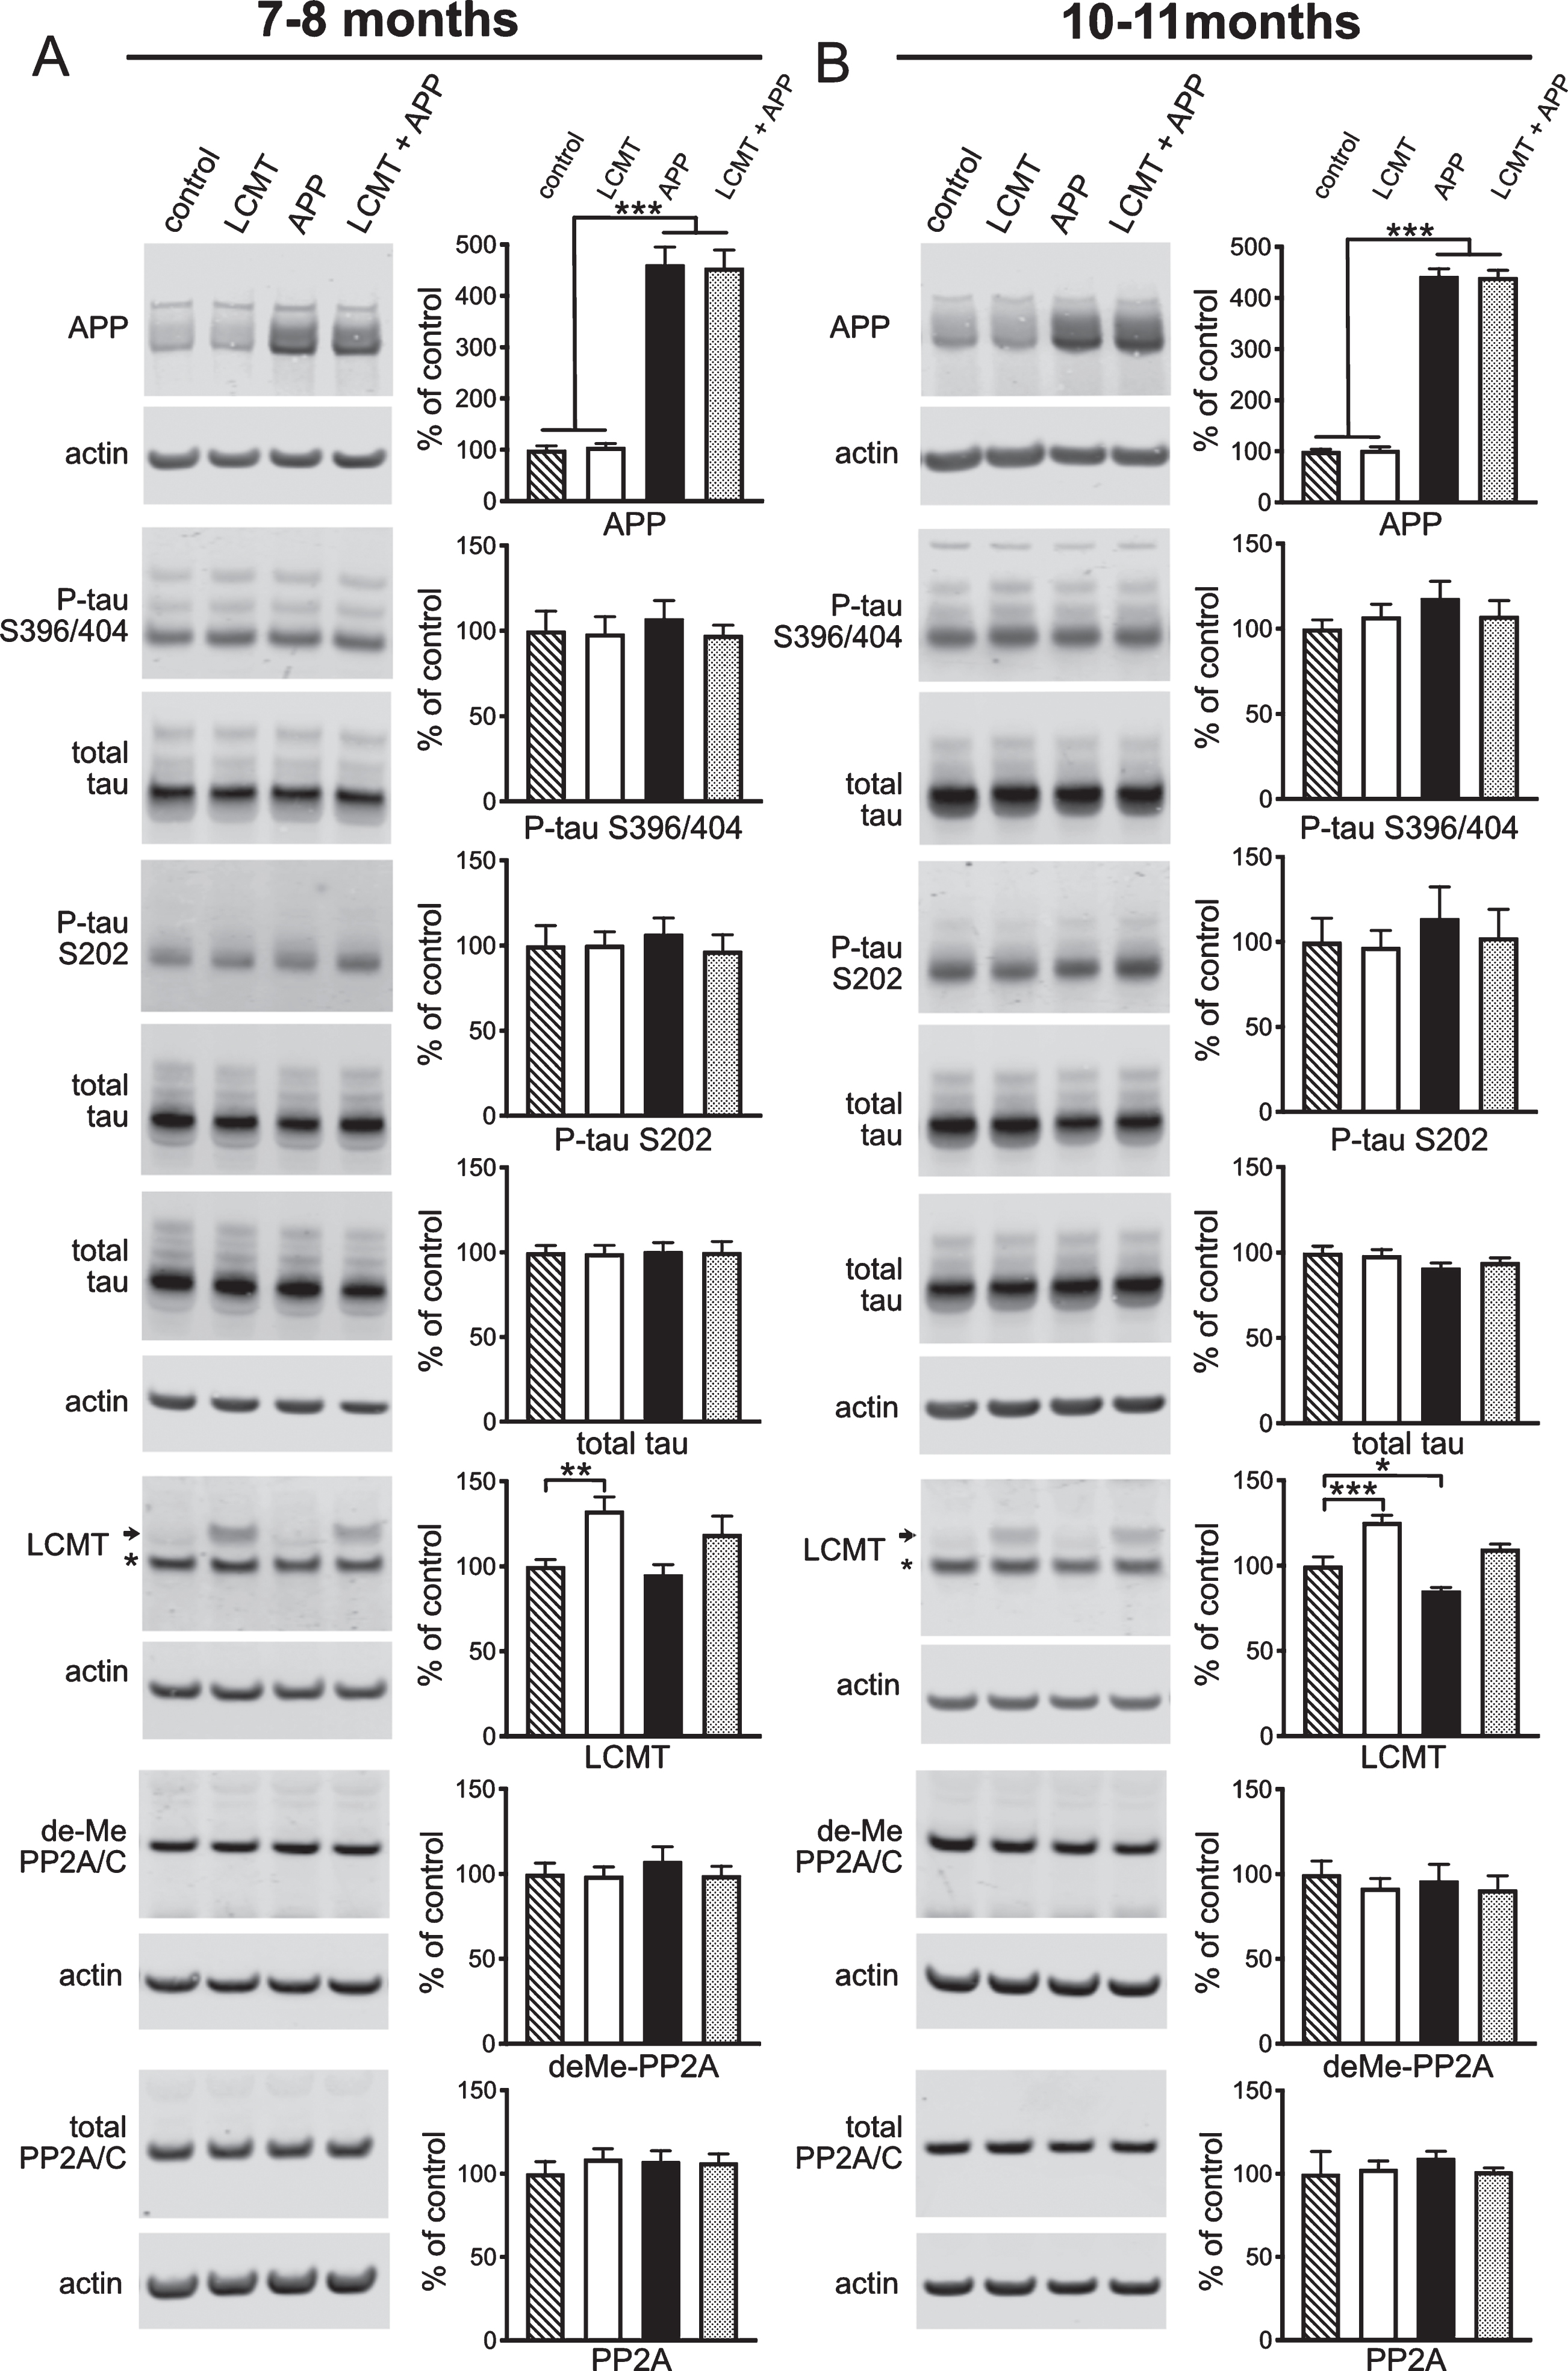 The effect of LCMT overexpression on APP expression, tau phosphorylation, and LCMT protein levels in Tg2576 mice. A, B) Representative western blots showing anti-APP, phospho-tau serine 396/404 and serine 202, total tau, and LCMT immunoreactivity in hippocampal homogenates prepared from 7-8 (A) or 9-10-month-old (B) control, LCMT overexpressing, Tg2576 APP transgenic, or LCMT overexpressing/APP transgenic mice together with corresponding histograms showing average normalized immunoreactivity (±SEM) in each group. APP genotype significantly affected APP expression (2-way ANOVA with APP and LCMT genotype as factors: F(1, 20) = 169.7, p < 0.0001 for 7-8-month-old mice and F(1, 20) = 1157, p < 0.0001 for 10-11-month-old mice). Sidak’s multiple comparisons showed no significant differences in APP expression between control and LCMT groups (p = 0.9873 for 7-8-month-old mice and p = 0.9804 for 10-11-month-old mice) or between APP and LCMT + APP groups (p = 0.9815 for 7-8-month-old and, p = 0.9843 for 10-11-month-old mice). Animals carrying an APP transgene alone showed a trend for increased tau phosphorylation at serine residues 396/404 (APP:107.3±10.46%versus control: 100±11.53, LCMT: 98.3±10.01, APP:107.3±10.46, LCMT + APP: 97.5±14.22 at 7-8 months, and APP:118.0±9.92%versus control: 100±5.15, LCMT: 107.2±7.28, LCMT + APP: 107.5±8.99 at 10-11 months) that was not statistically significant (2-way ANOVA test for interaction with APP and LCMT genotype as factors: F(1,20) = 0.174, p = 0.6811 for 7-8-month-old mice and F(1,20) = 1.212, p = 0.2840 for 10-11-month-old mice). Animals carrying an APP transgene alone showed a similar trend for increased tau phosphorylation at serine residue 202 (APP:106.9±9.37%versus control: 100±11.68, LCMT: 100.5±7.64, LCMT + APP: 97.0±9.36 at 7-8 months, and APP:114.0±18.47%versus control: 100±13.92, LCMT: 97.0±9.701, LCMT + APP: 102.6±16.65 at 10-11 months) that was not statistically significant (2-way ANOVA test for interaction with APP and LCMT genotype as factors: F(1,20) = 0.2877, p = 0.5976 for 7-8-month-old mice and F(1,20) = 0.07876, p = 0.7819 for 10-11-month-old mice). Neither LCMT overexpression nor APP transgene expression significantly affected endogenous tau levels (2-way ANOVA for effect of LCMT transgene with APP and LCMT genotype as factors: F(1,44) = 0.0111, p = 0.9166 for 7-8-month-old mice, and F(1,44) = 0.06945, p = 0.7934 for 10-11-month-old mice);(2-way ANOVA for effect of APP transgene with APP and LCMT genotype as factors: F(1,44) = 0.0223, p = 0.8819 for 7-8-month-old mice and F(1,44) = 4.196, p = 0.0465 for 10-11-month-old mice). As expected, transgenic LCMT expression significantly affected LCMT protein levels (2-way ANOVA with LCMT and APP genotype as factors: F(1,20) = 14.1, p = 0.0012 for 7-8-month-old mice and F(1,20) = 46.97, p < 0.0001 for 10-11-month-old mice. In addition, for 10-11-month-old mice, Sidak’s multiple comparisons show a significant decrease in total LCMT expression in the APP transgenic group relative to controls (p = 0.0204), and in the LCMT + APP group relative to LCMT alone group (p = 0.0134). Transgenic LCMT overexpression did not significantly affect the amount of PP2A catalytic subunit that was demethylated at Leucine 309 (2-way ANOVA with LCMT and APP genotype as factors: F(1,20) = 0.5316, p = 0.4744 and F(1,20) = 0.3604, p = 0.5550 respectively for 7-8-month-old mice, and F(1,20) = 0.7365, p = 0.4010 and F(1,20) = 0.0877, p = 0.7702 respectively for 10-11-month-old mice). Transgenic LCMT overexpression also did not significantly affect the total amount of PP2A catalytic subunit (2-way ANOVA with LCMT and APP genotype as factors: F(1,20) = 0.4440, p = 0.5128 and F(1,20) = 0.1909, p = 0.6669 respectively for 7-8-month-old mice, and F(1,20) = 0.1213, p = 0.7313 and F(1,20) = 0.2888, p = 0.5969 respectively for 10-11-month-old mice). For all blots band intensities in each lane were normalized to corresponding actin or total tau immunoreactivity in that lane and values were expressed as a percentage of the mean of the control group (N = 6 per group).